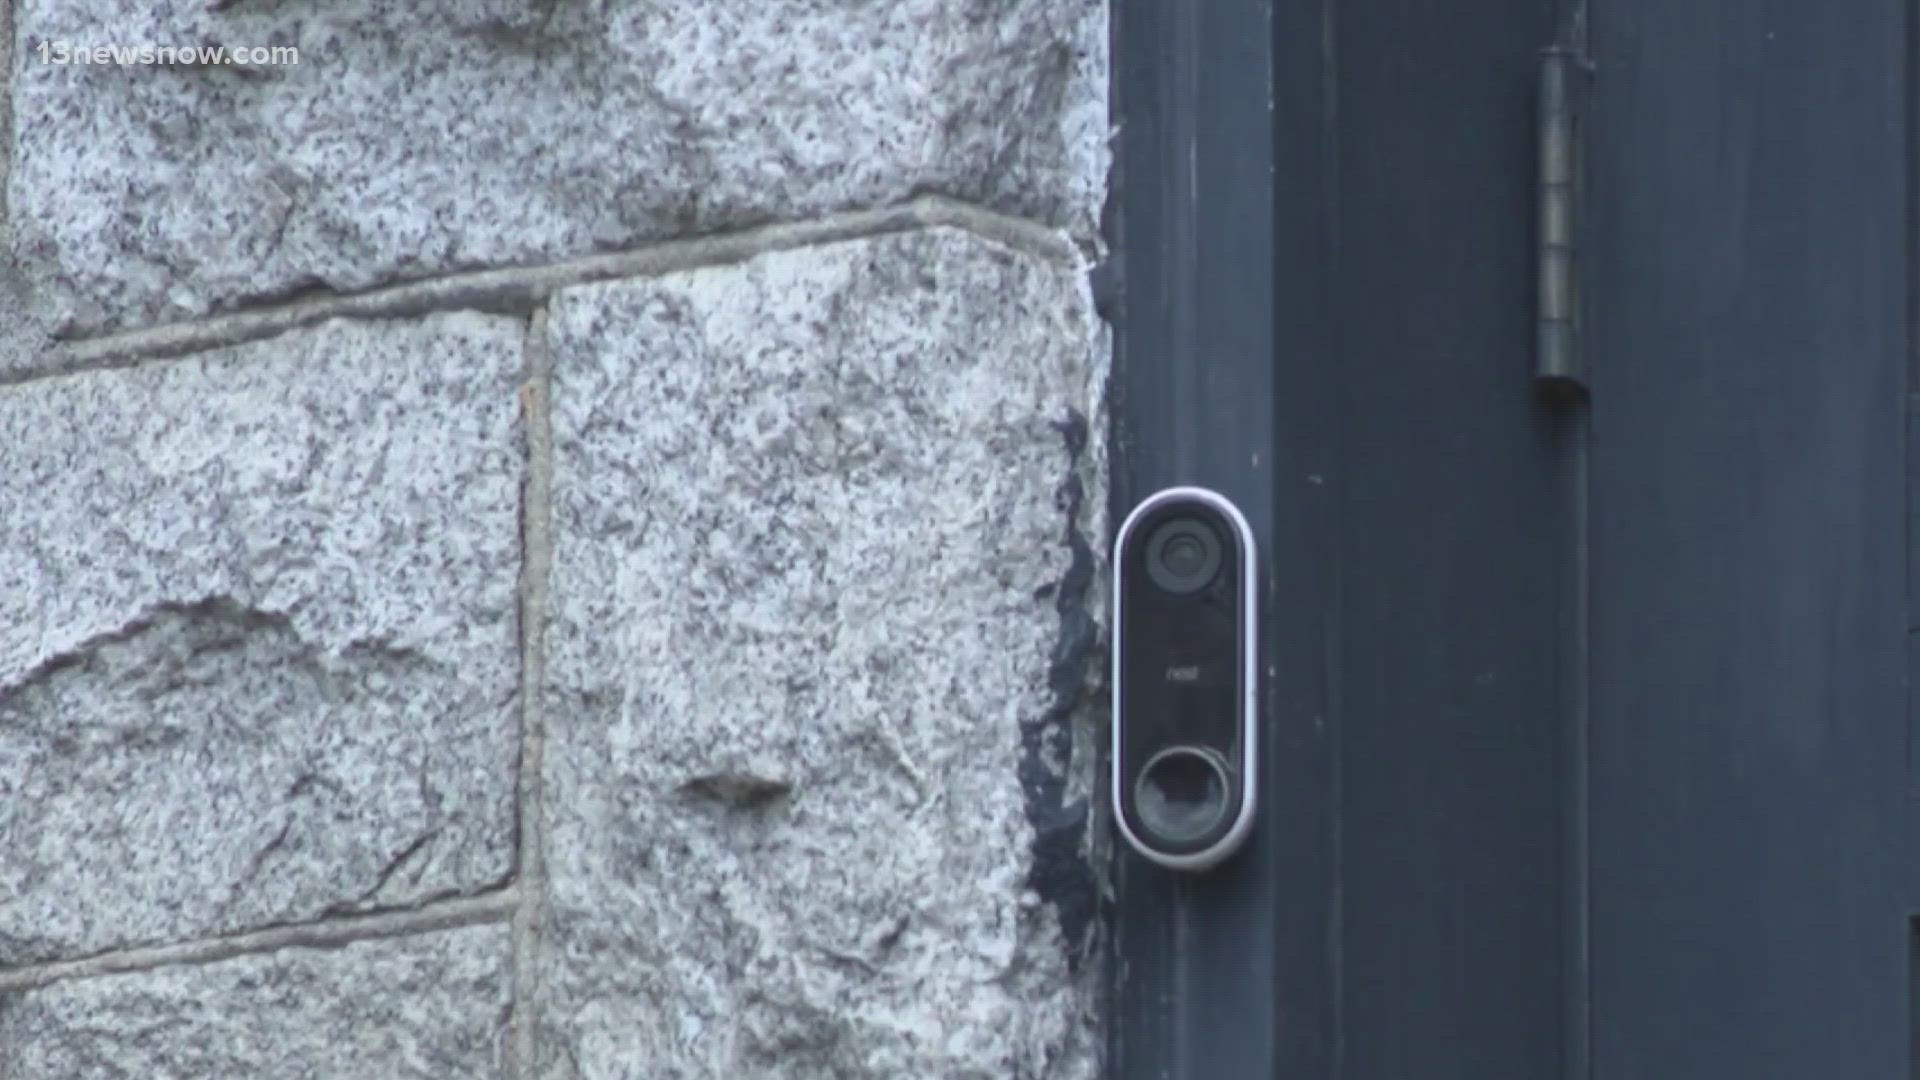 City leaders launched a new website to keep track of cameras around the community. It's a part of a plan to expand the city's use of technology in safety.